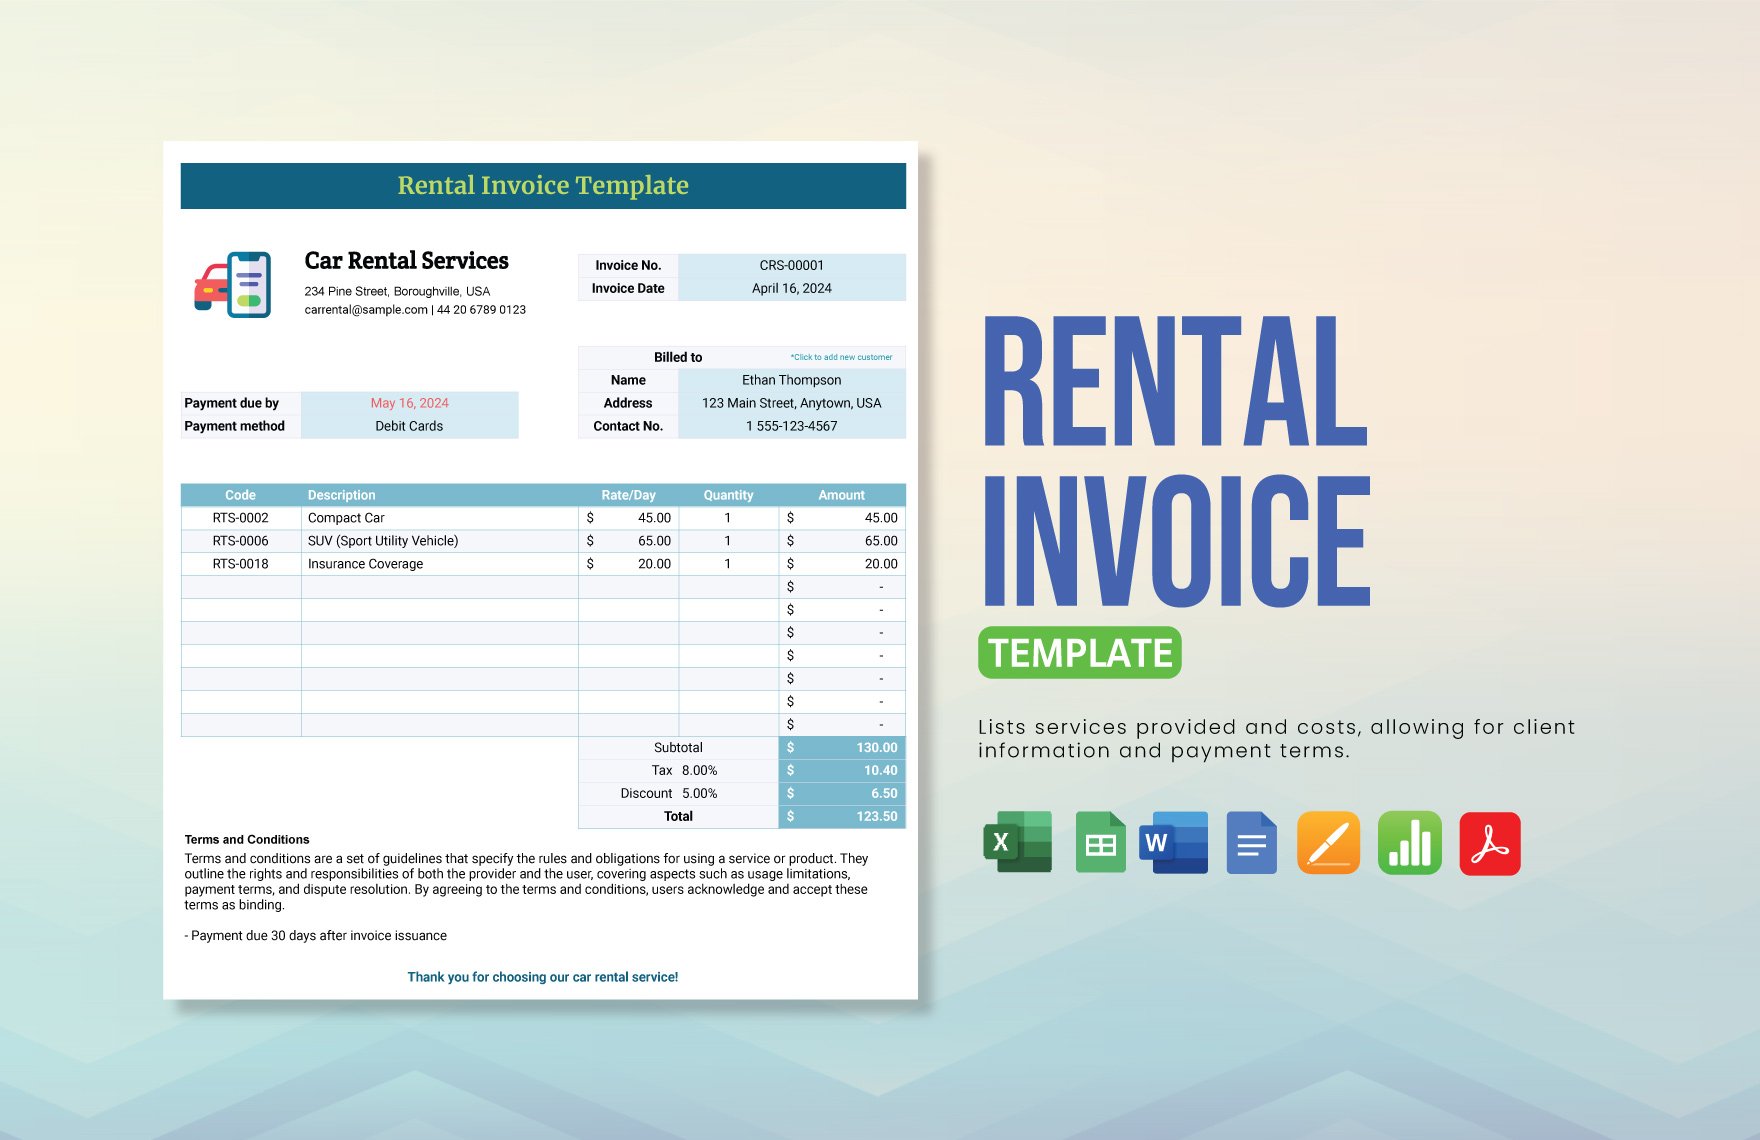 Rental Invoice Template in Word, Google Docs, Excel, PDF, Google Sheets, Apple Pages, Apple Numbers